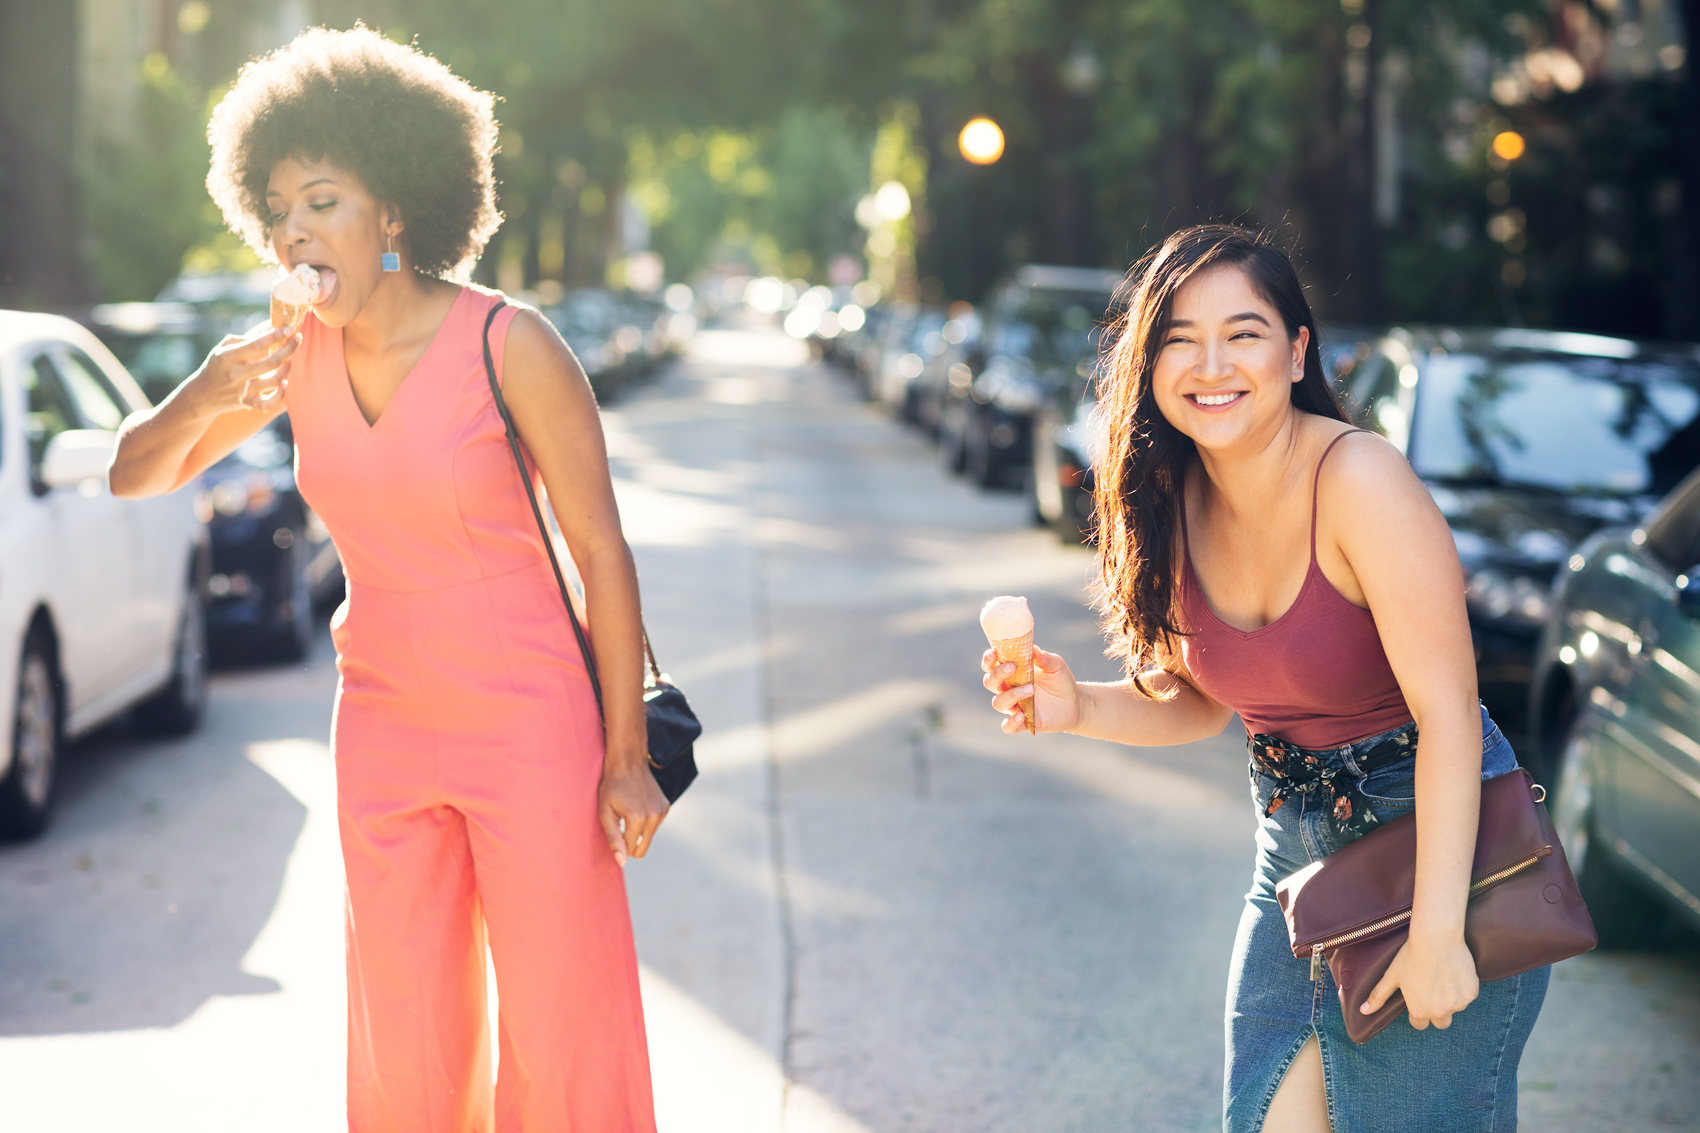 Two young women laugh as they eat melting ice cream cones in the middle of a Washington, DC street.